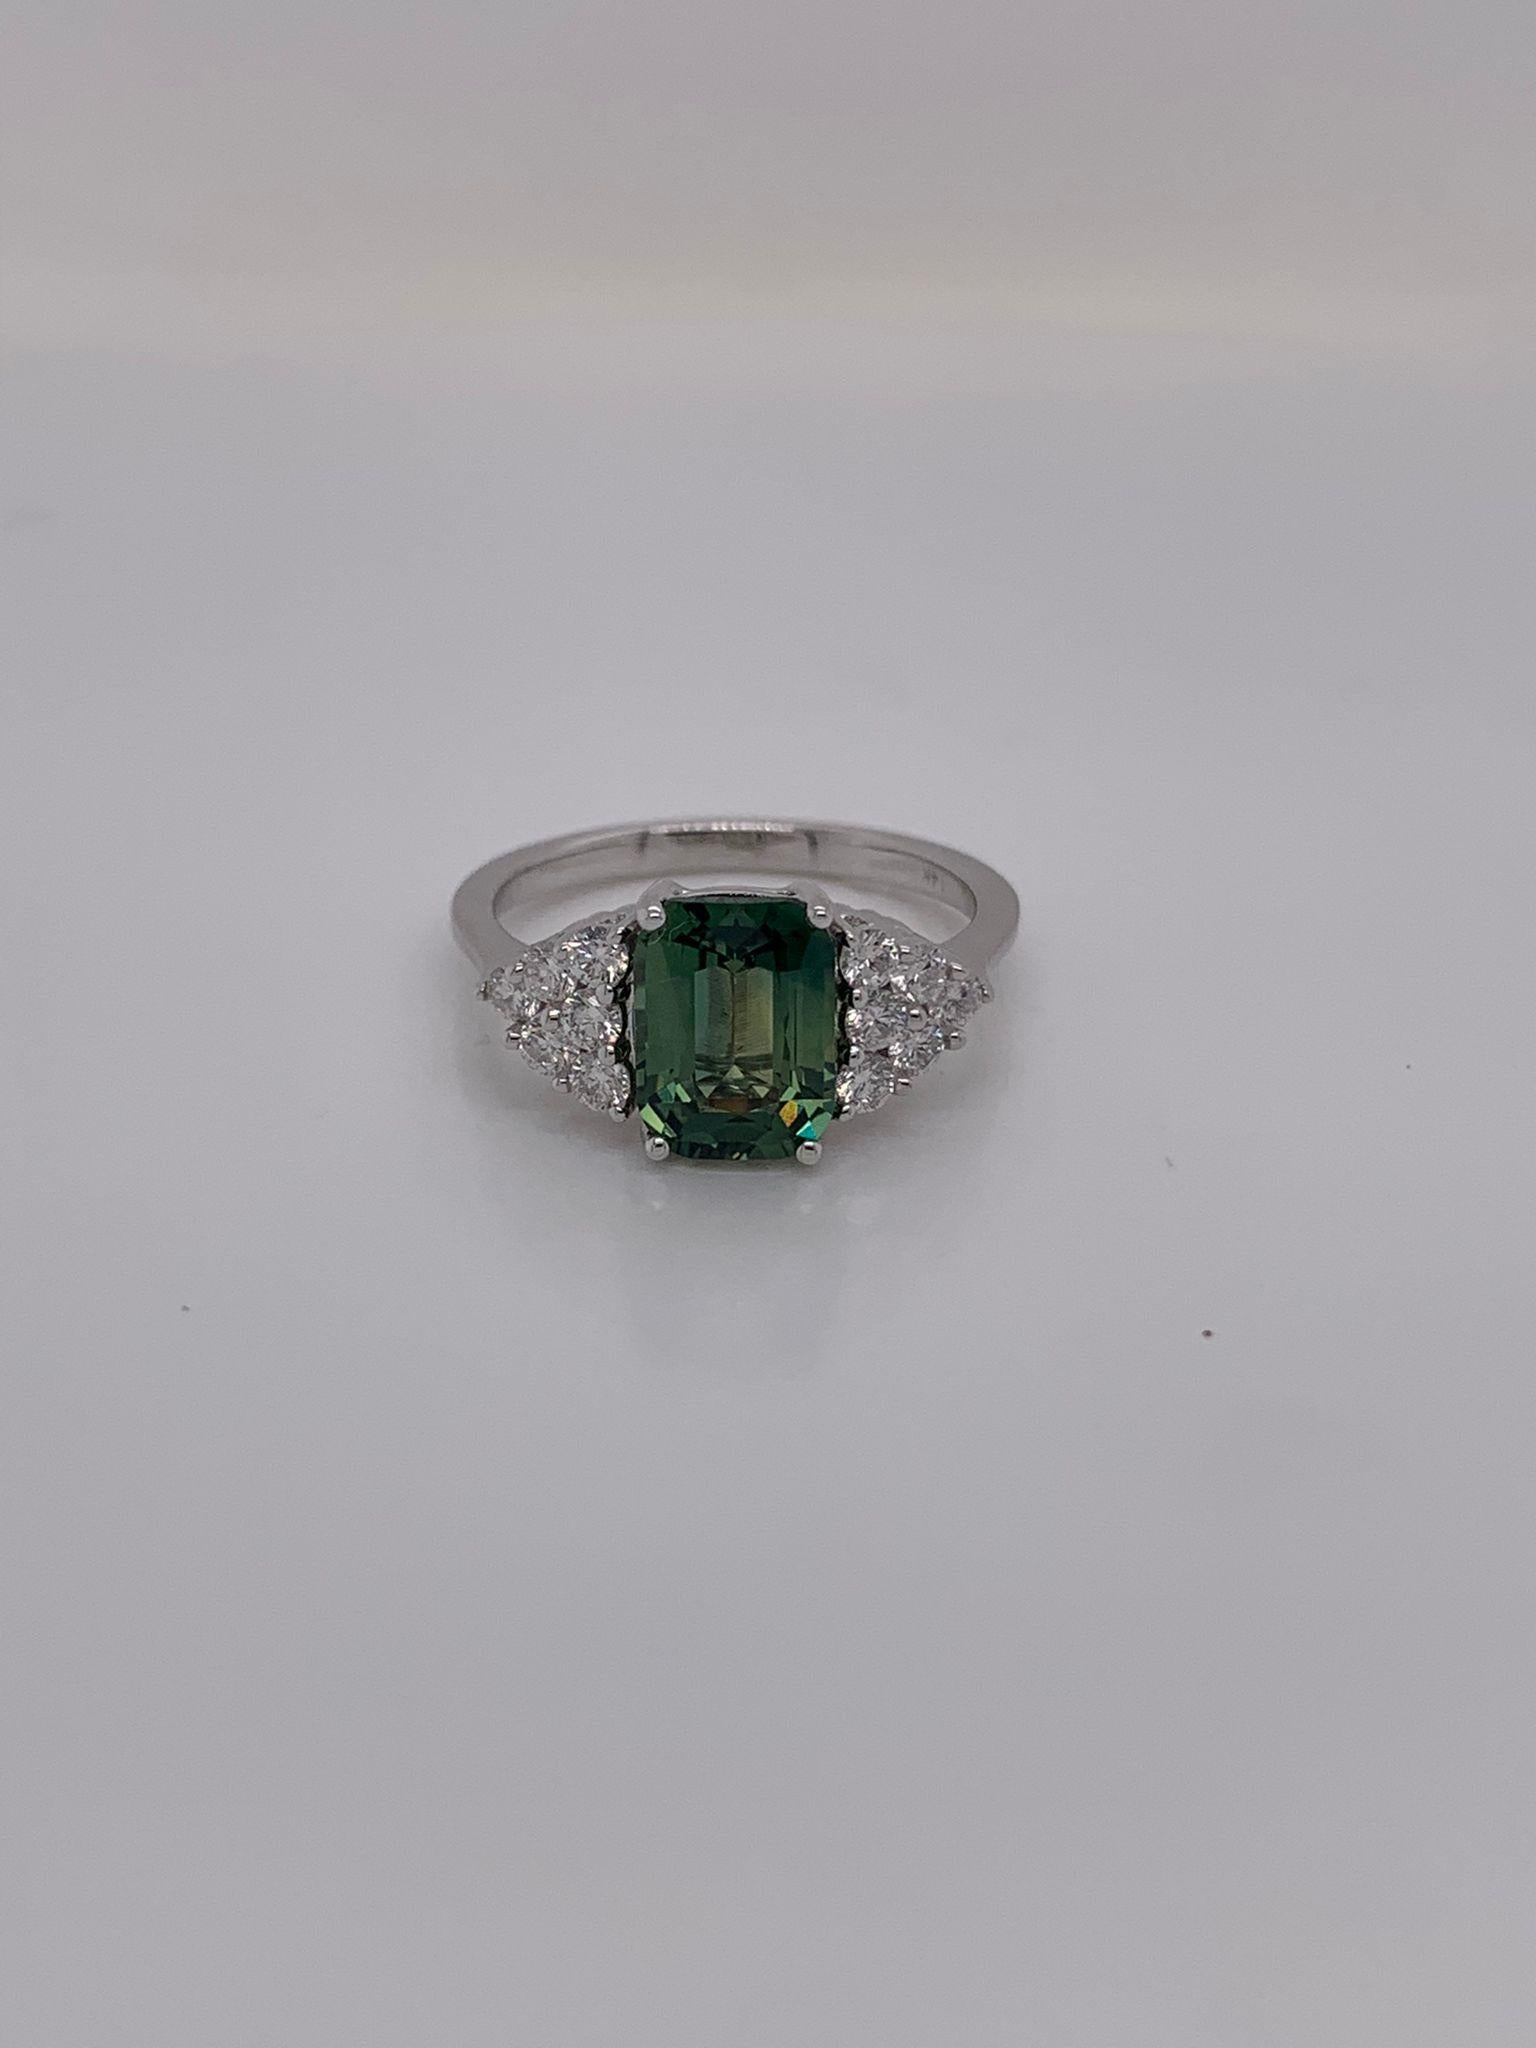 Cushion green sapphire weighing 2.58 cts.
Measuring (8.7x6.5) mm 
12 pieces of round diamonds weighing .42 cts.
Set in 14K white gold ring